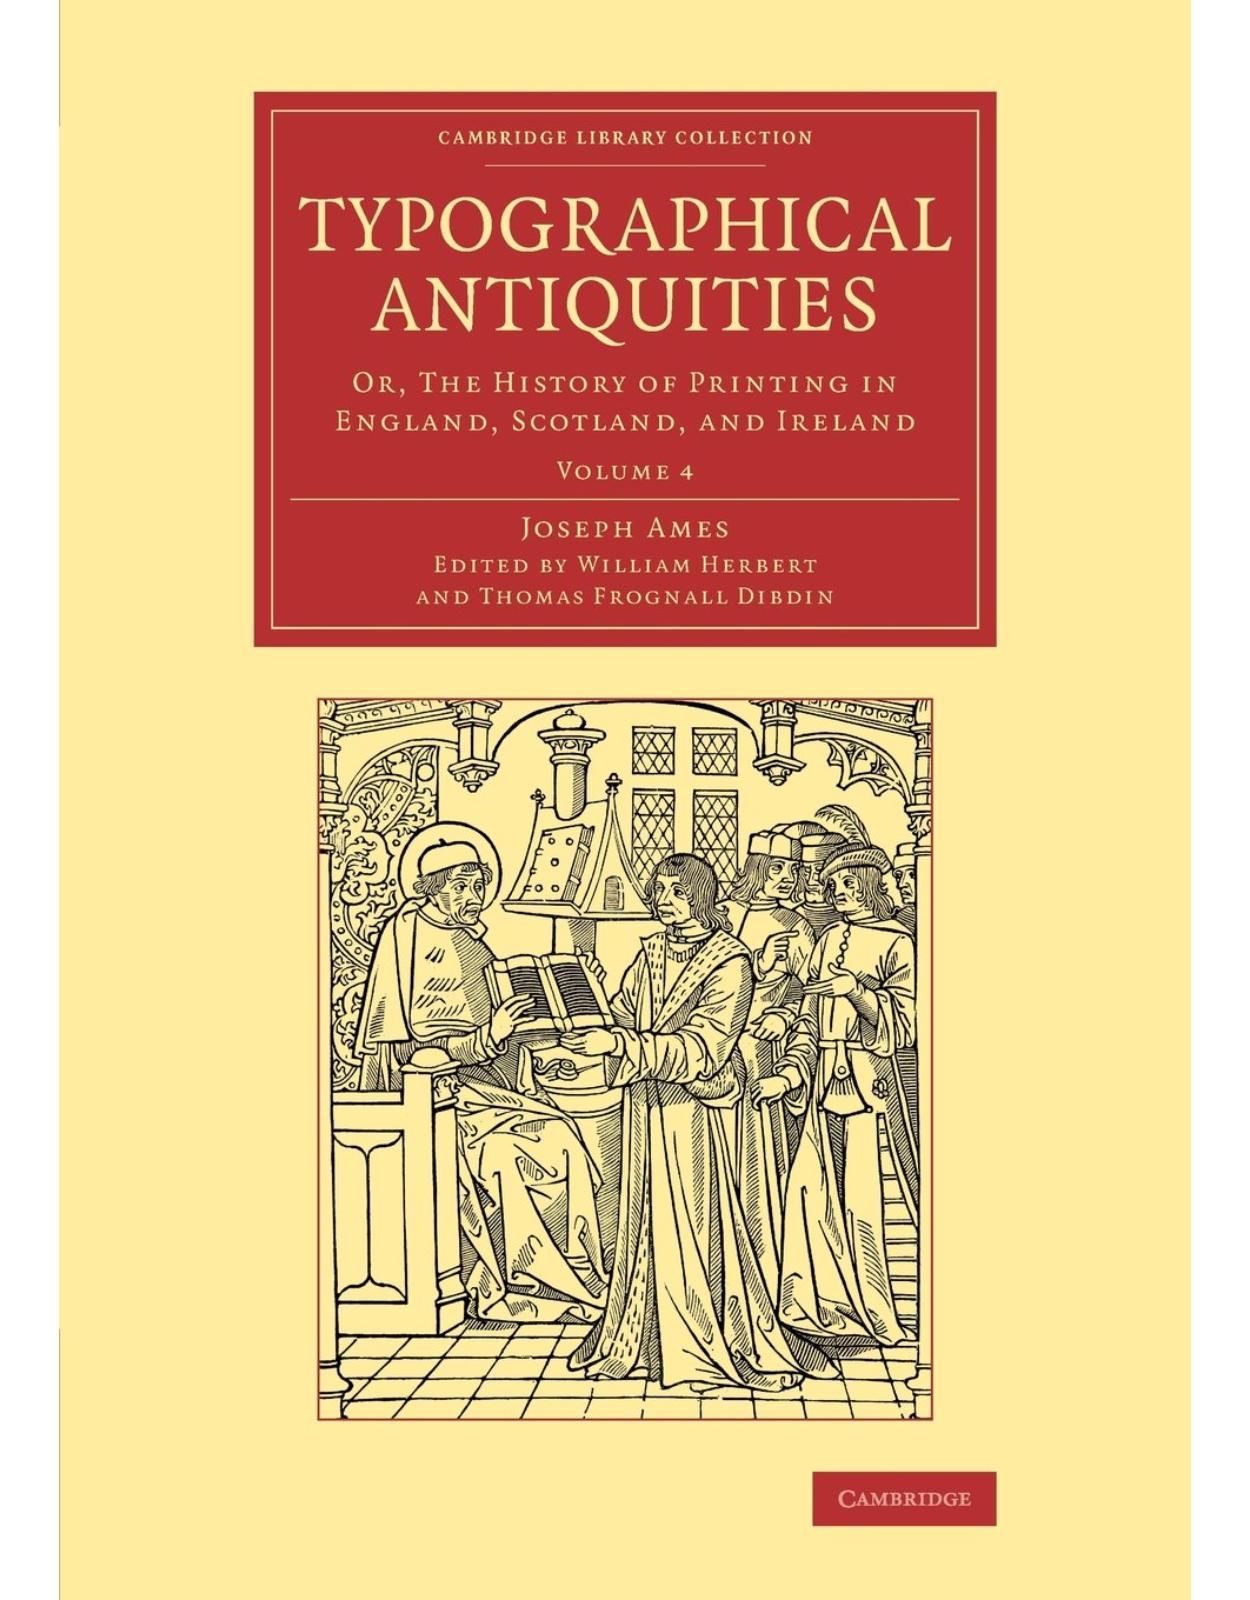 Typographical Antiquities 4 Volume Set: Typographical Antiquities: Or, The History of Printing in England, Scotland, and Ireland: Volume 4 (Cambridge ... of Printing, Publishing and Libraries)